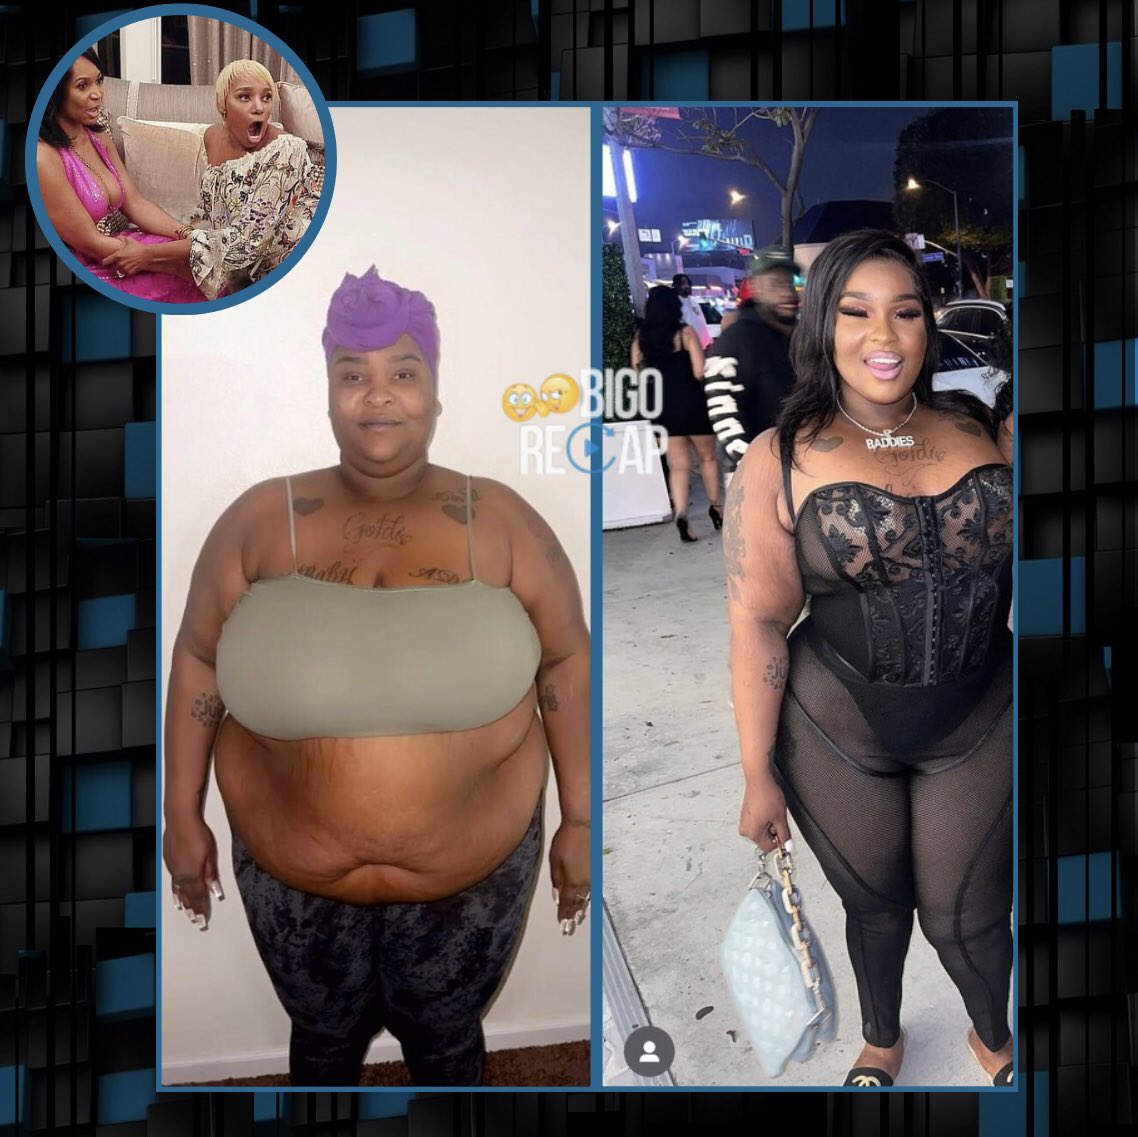 Shouts out to #Rollie from #ZeusNetwork #Baddies as she’s looking AMAZING! After her recent weight loss surgery. GO HEAD Rollie!! Take a look! 😯🤯 👏🏾 

#Bigorecap #Bigolive #Bigousa #Bigo